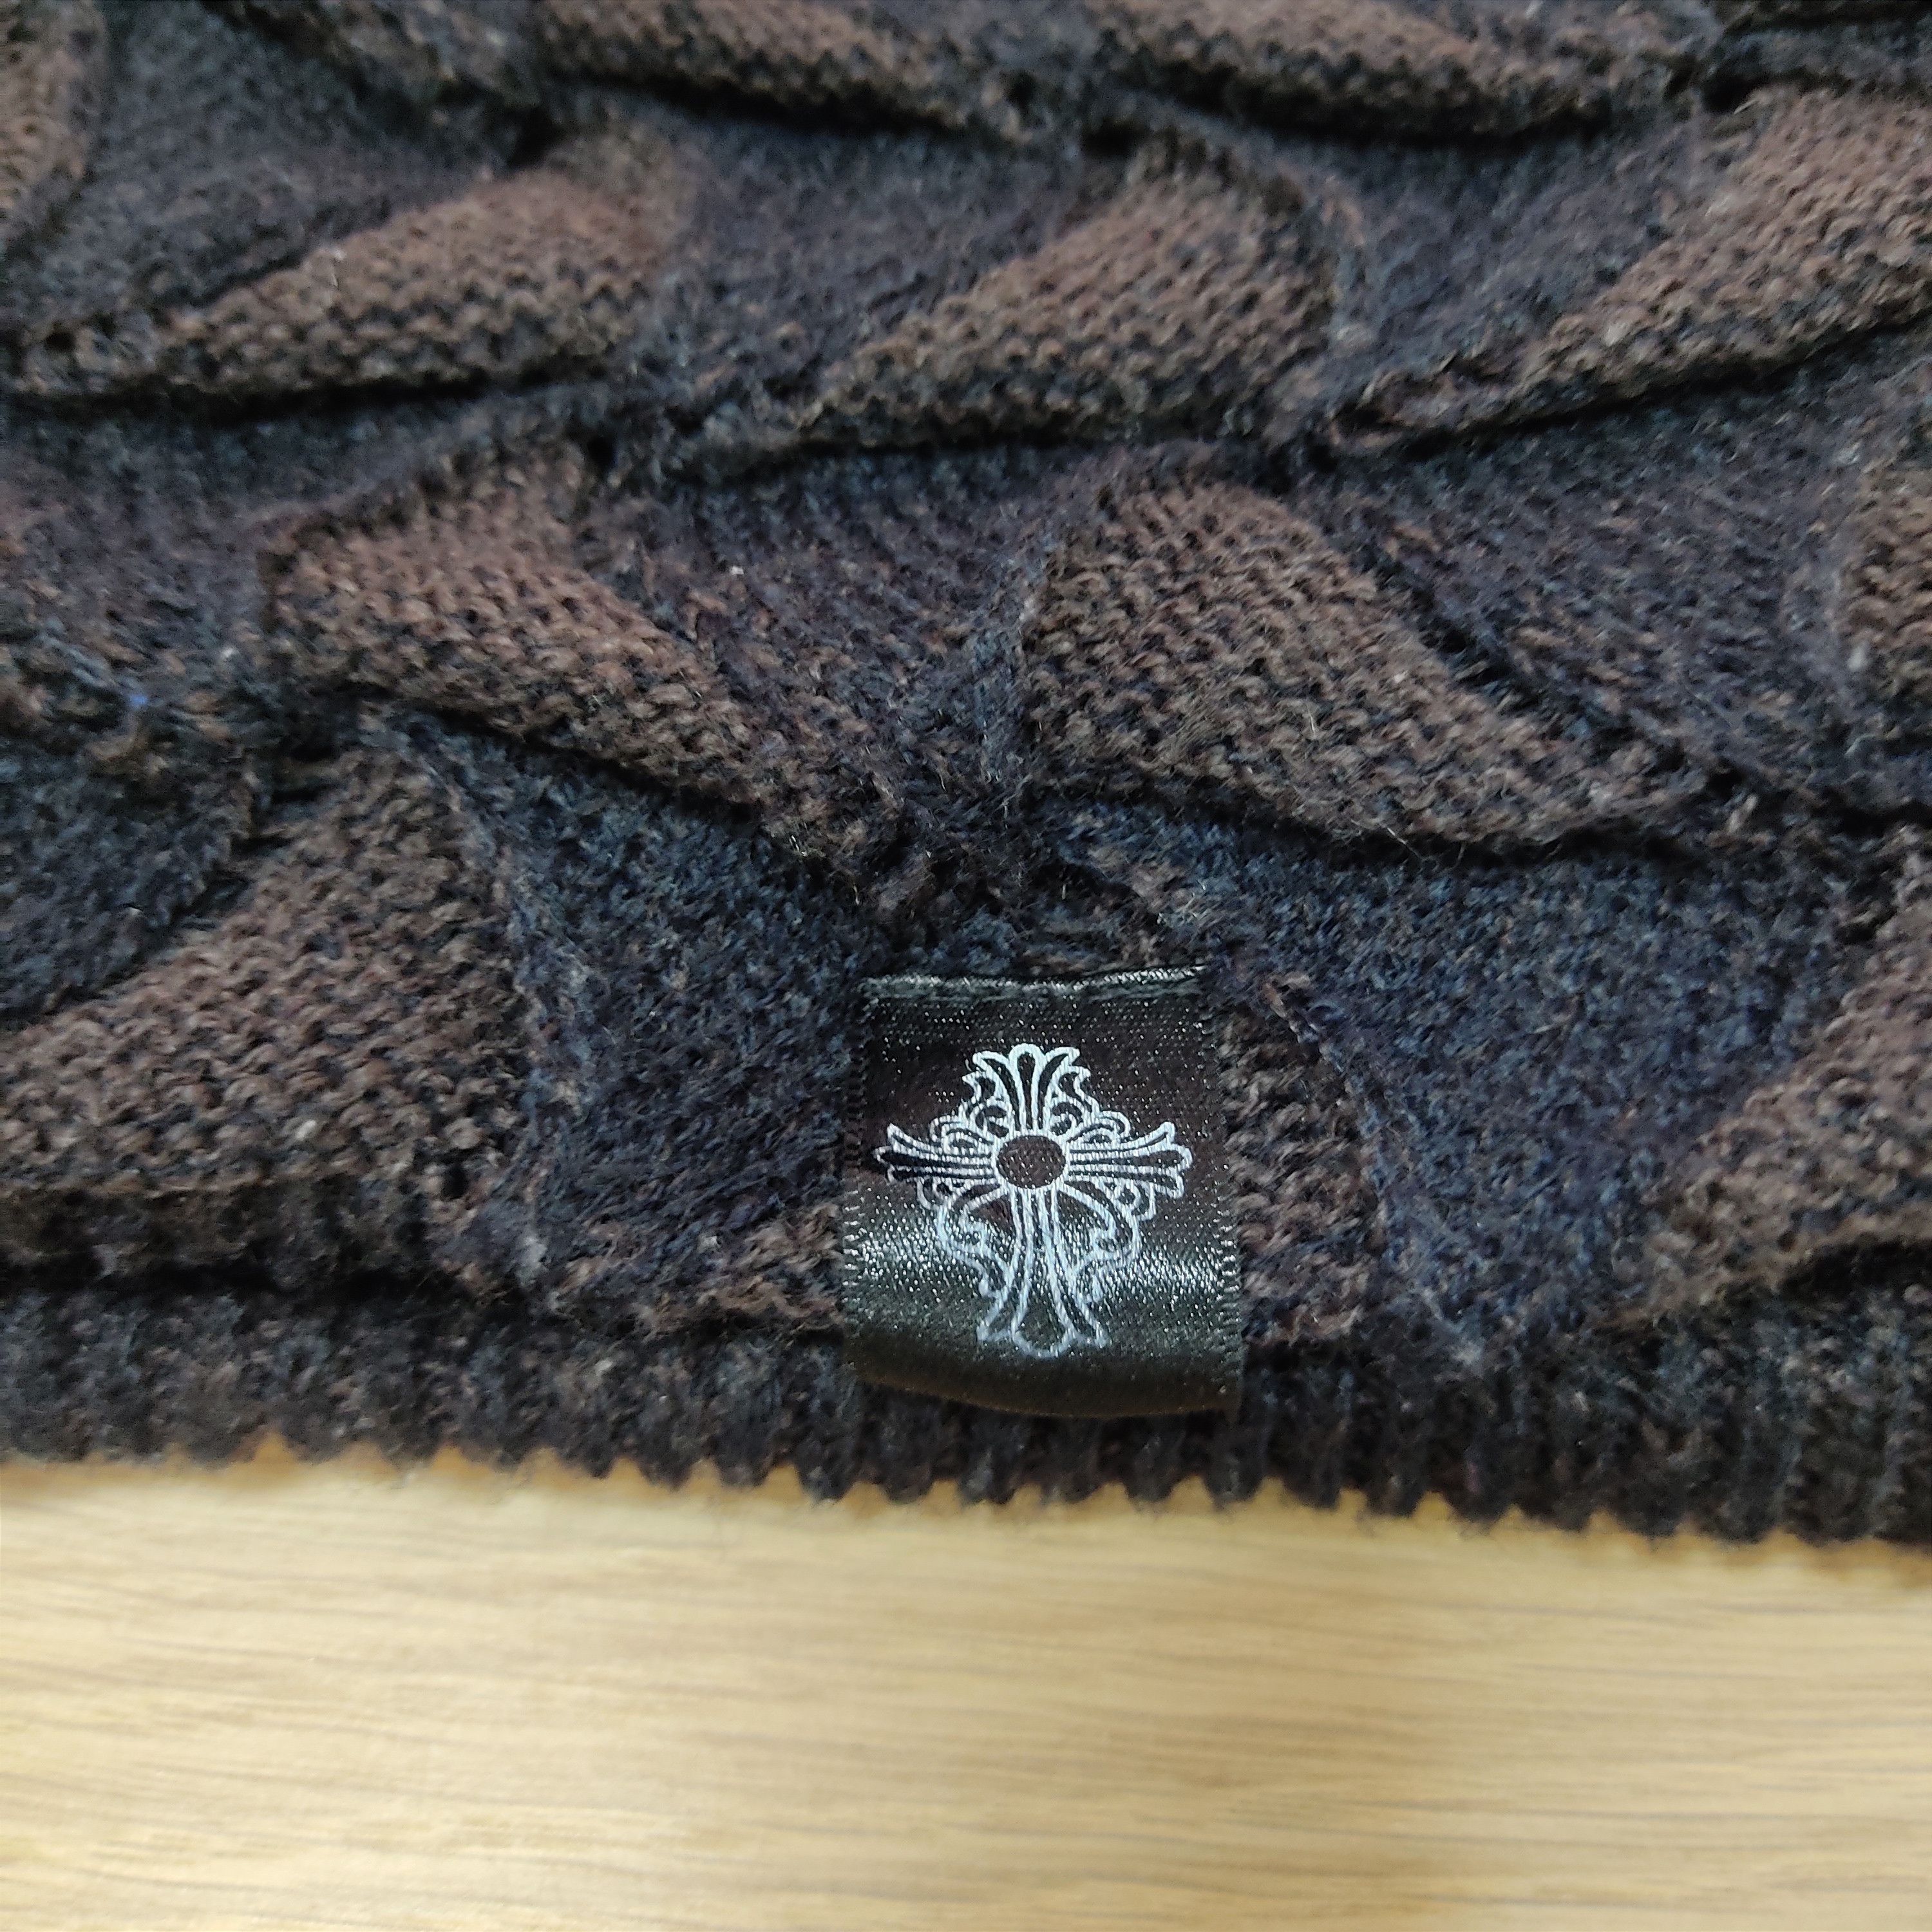 Rare - Reversible Knitted Chrome Hearts Inspired Pattern Beanie - 3